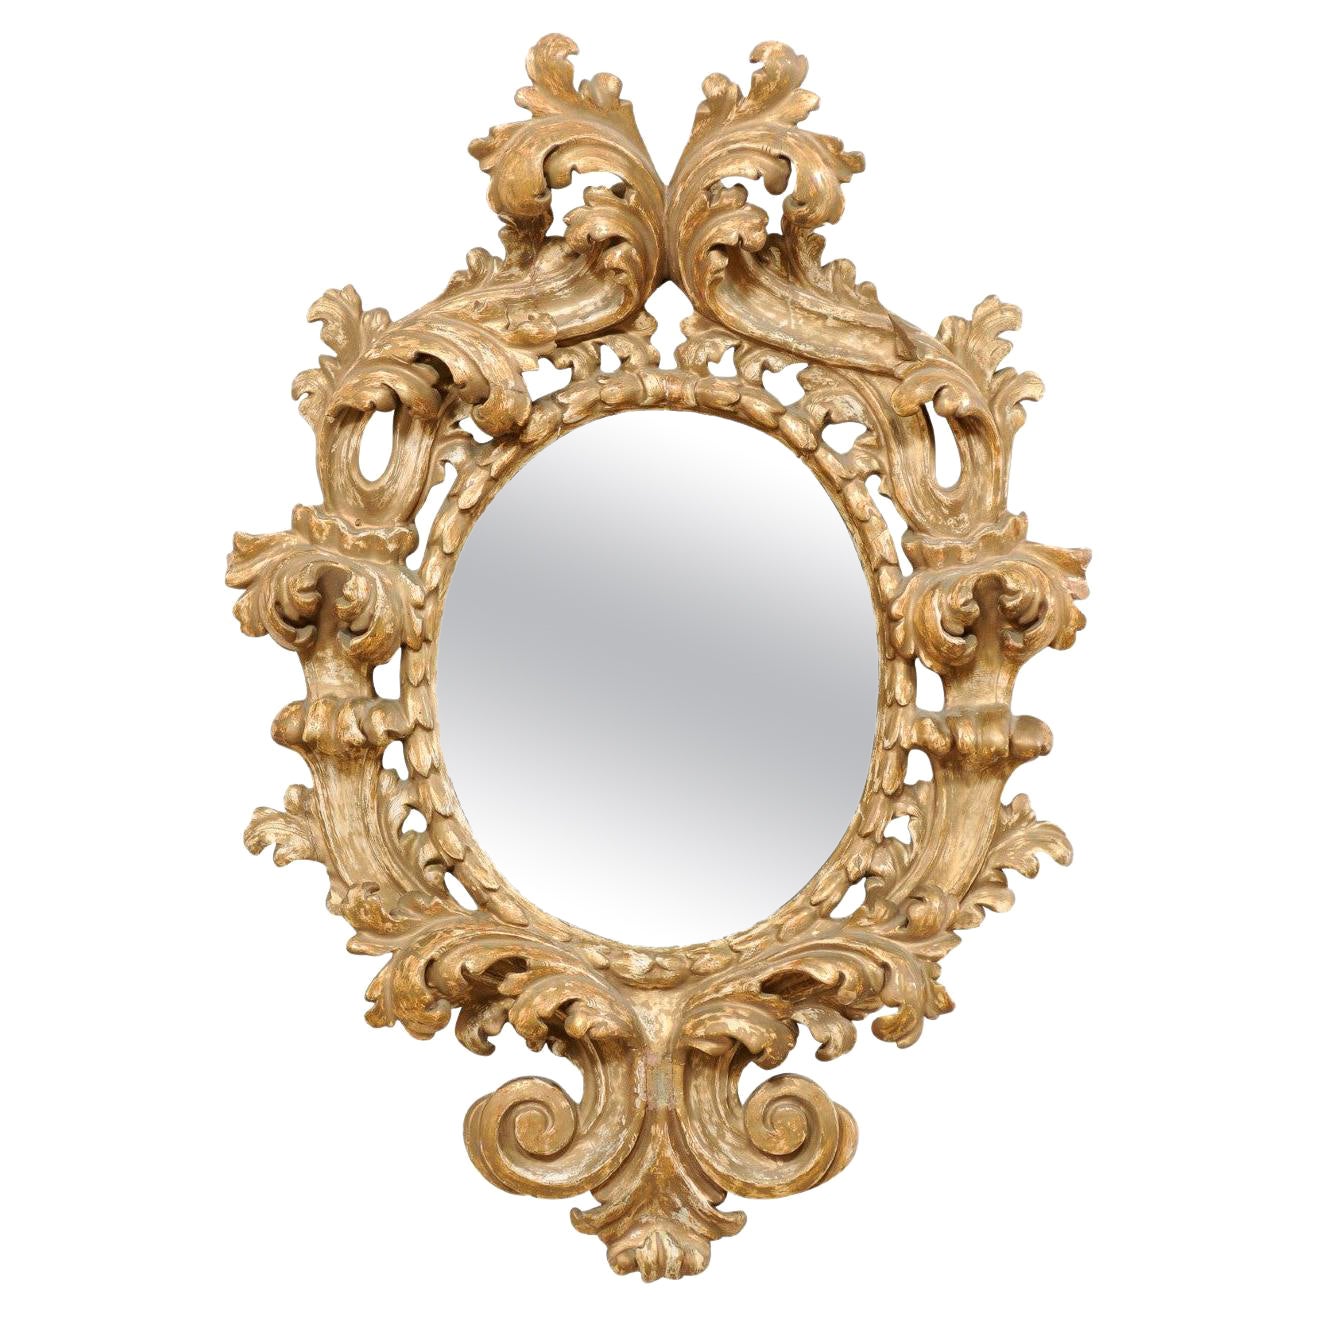 Italian Ornate Acanthus-Carved Mirror w/Oblong, Oval-Shaped Glass, 18th/19th C. For Sale